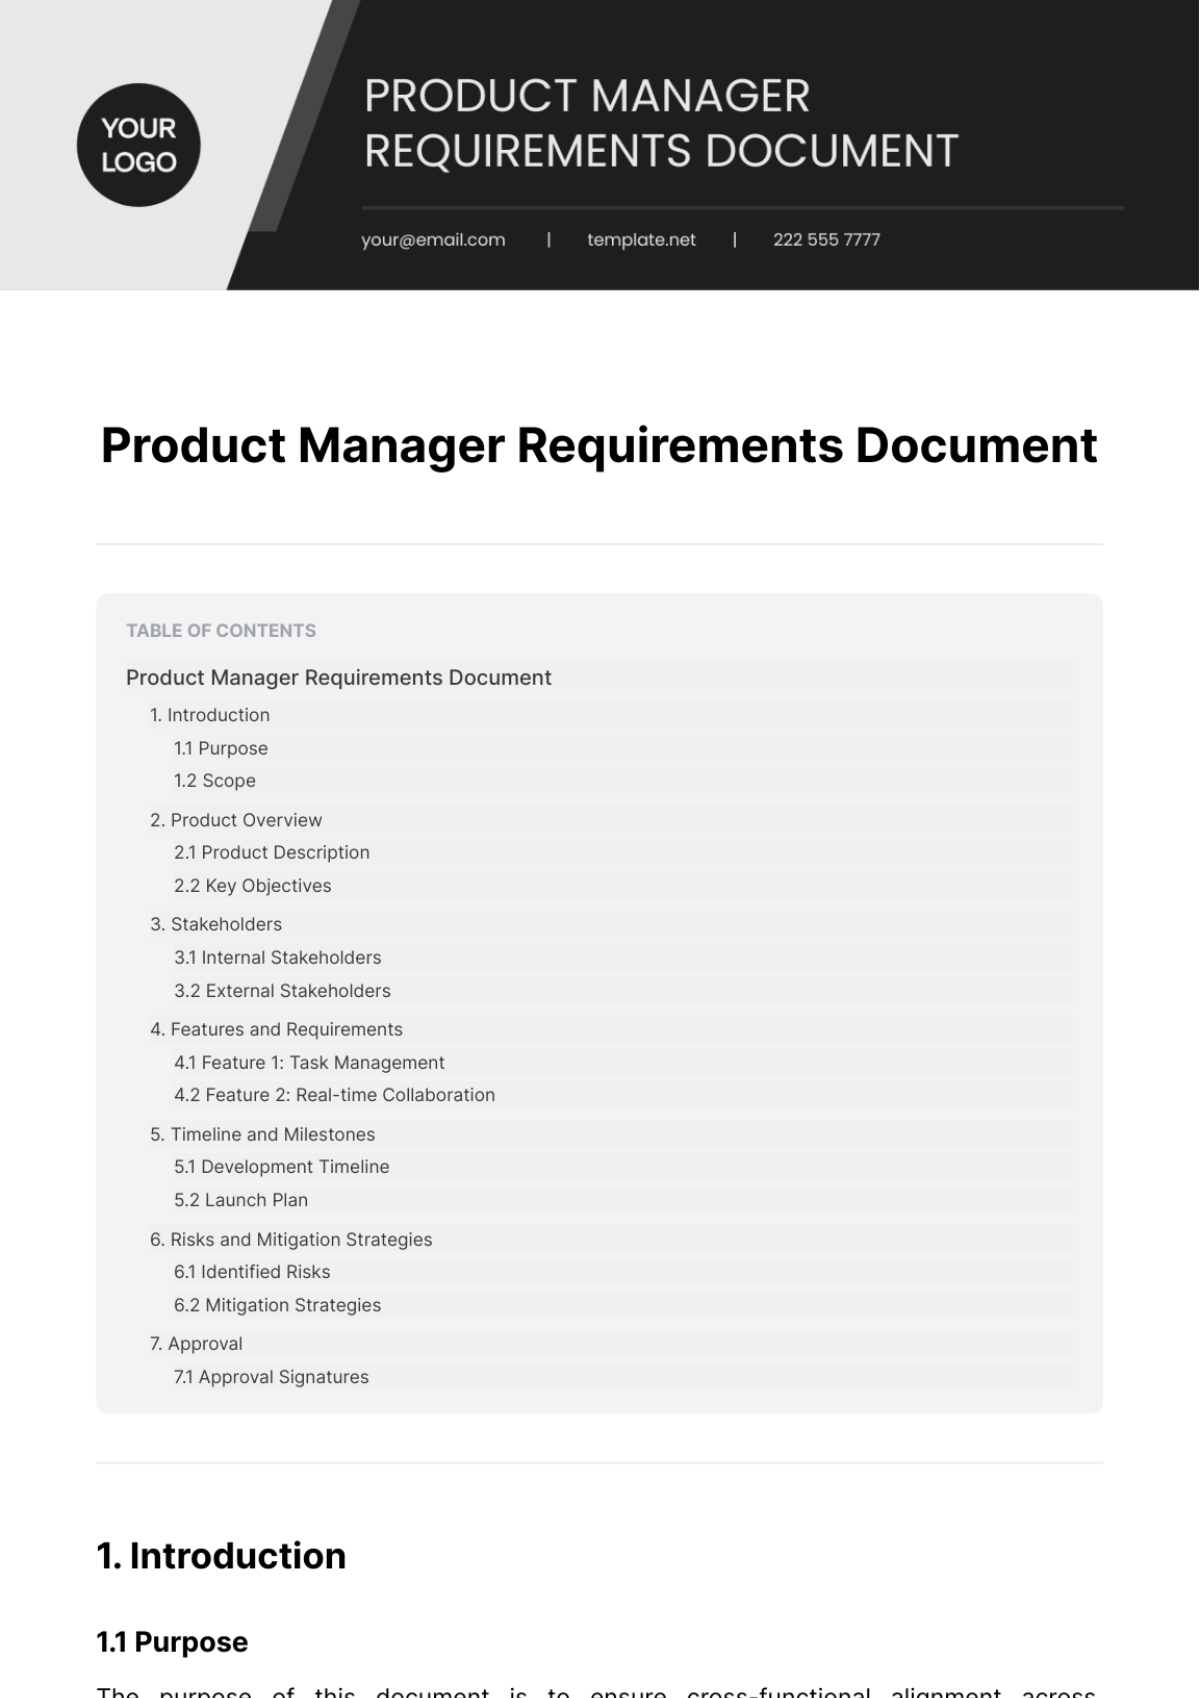 Product Manager Requirements Document Template